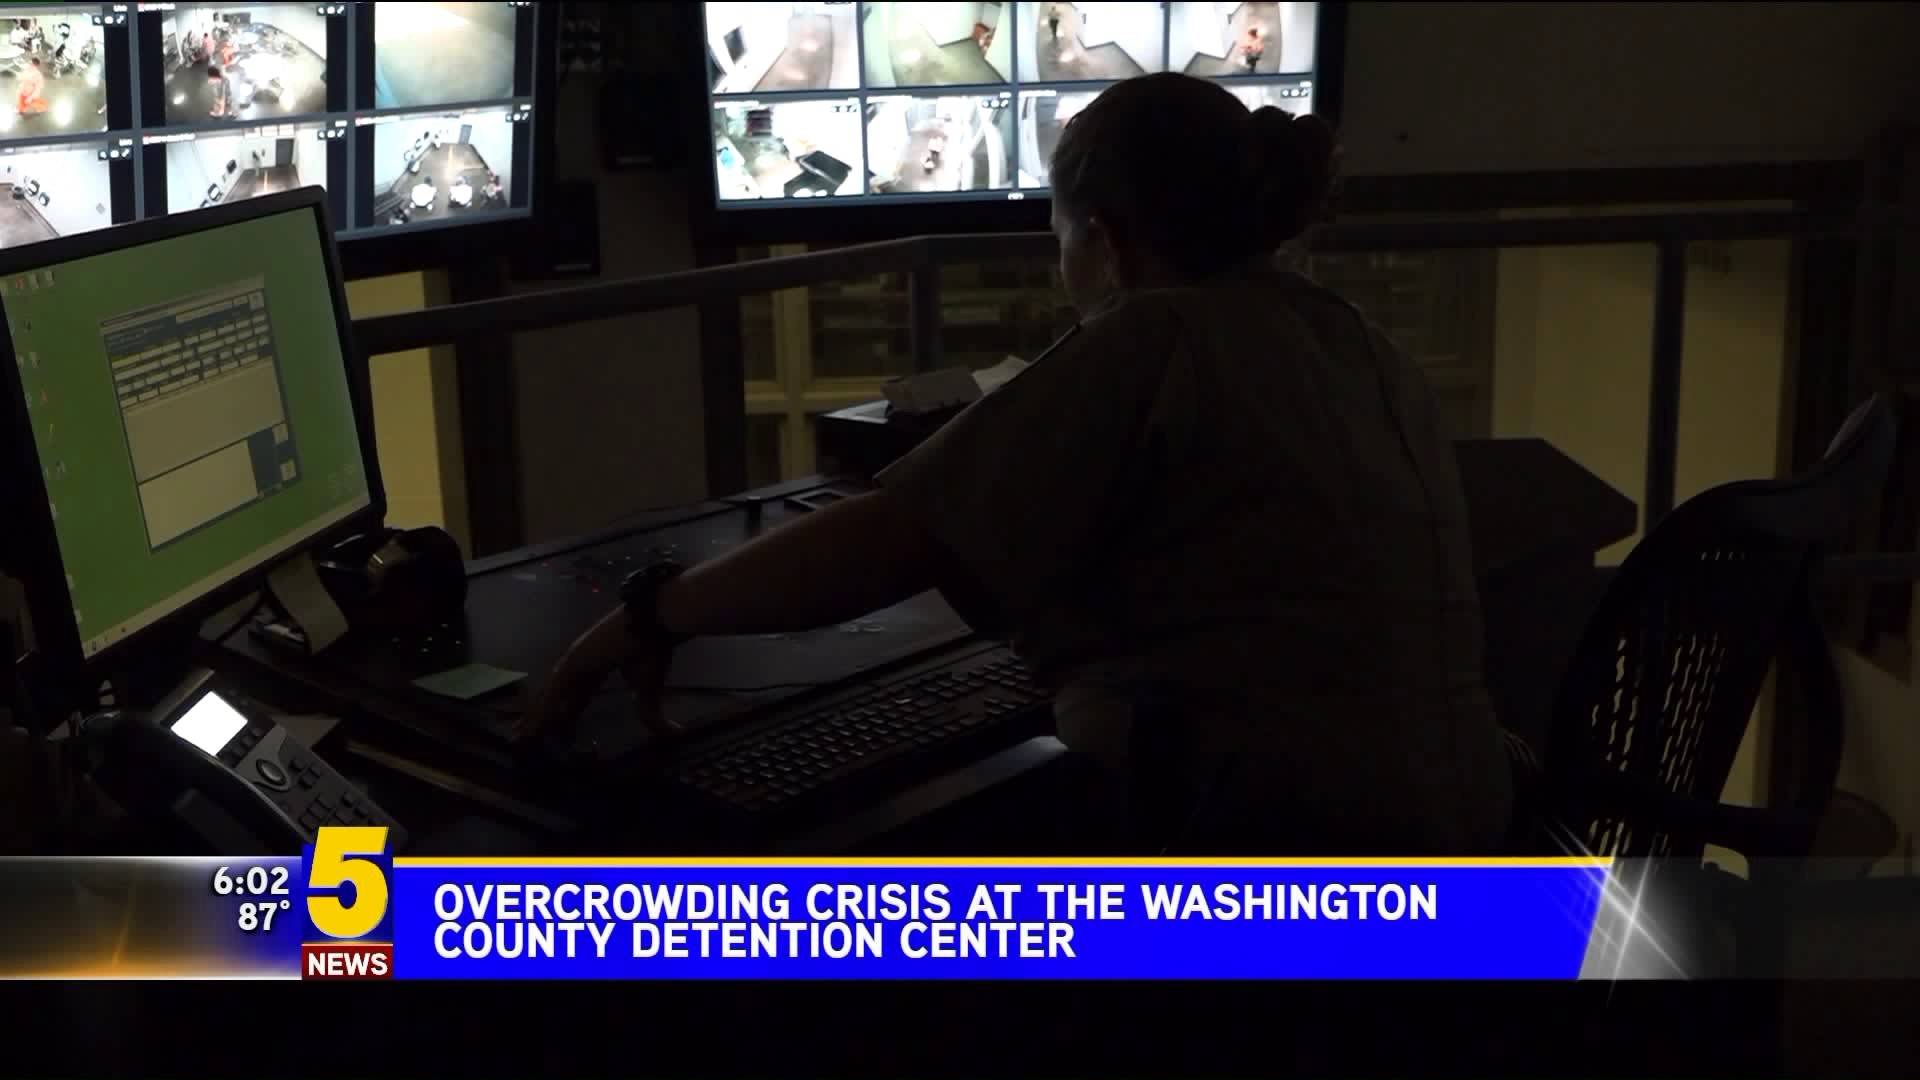 Overcrowding Crisis at Washington County Detention Center